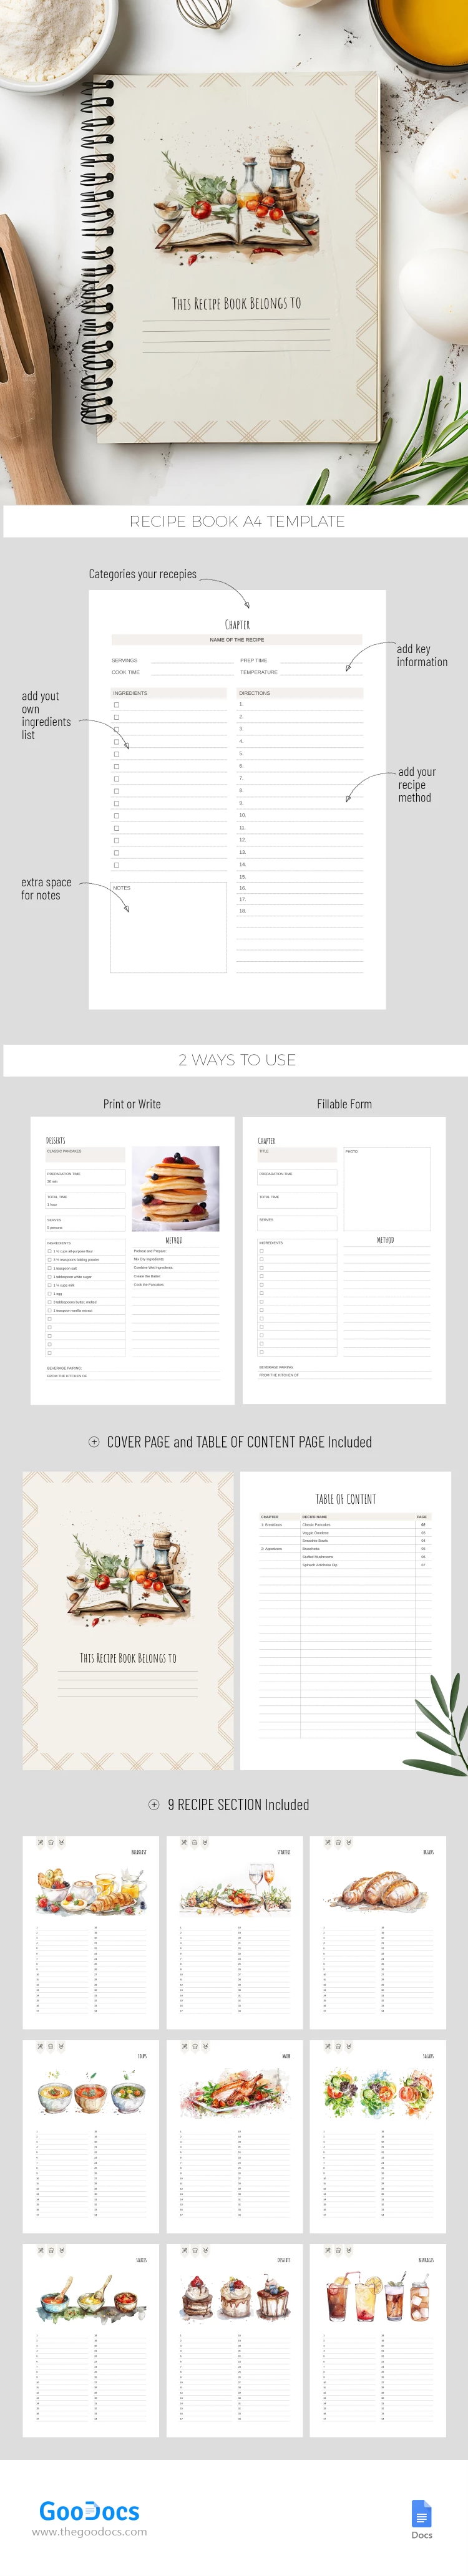 Recipe Book Table of Contents - free Google Docs Template - 10068812